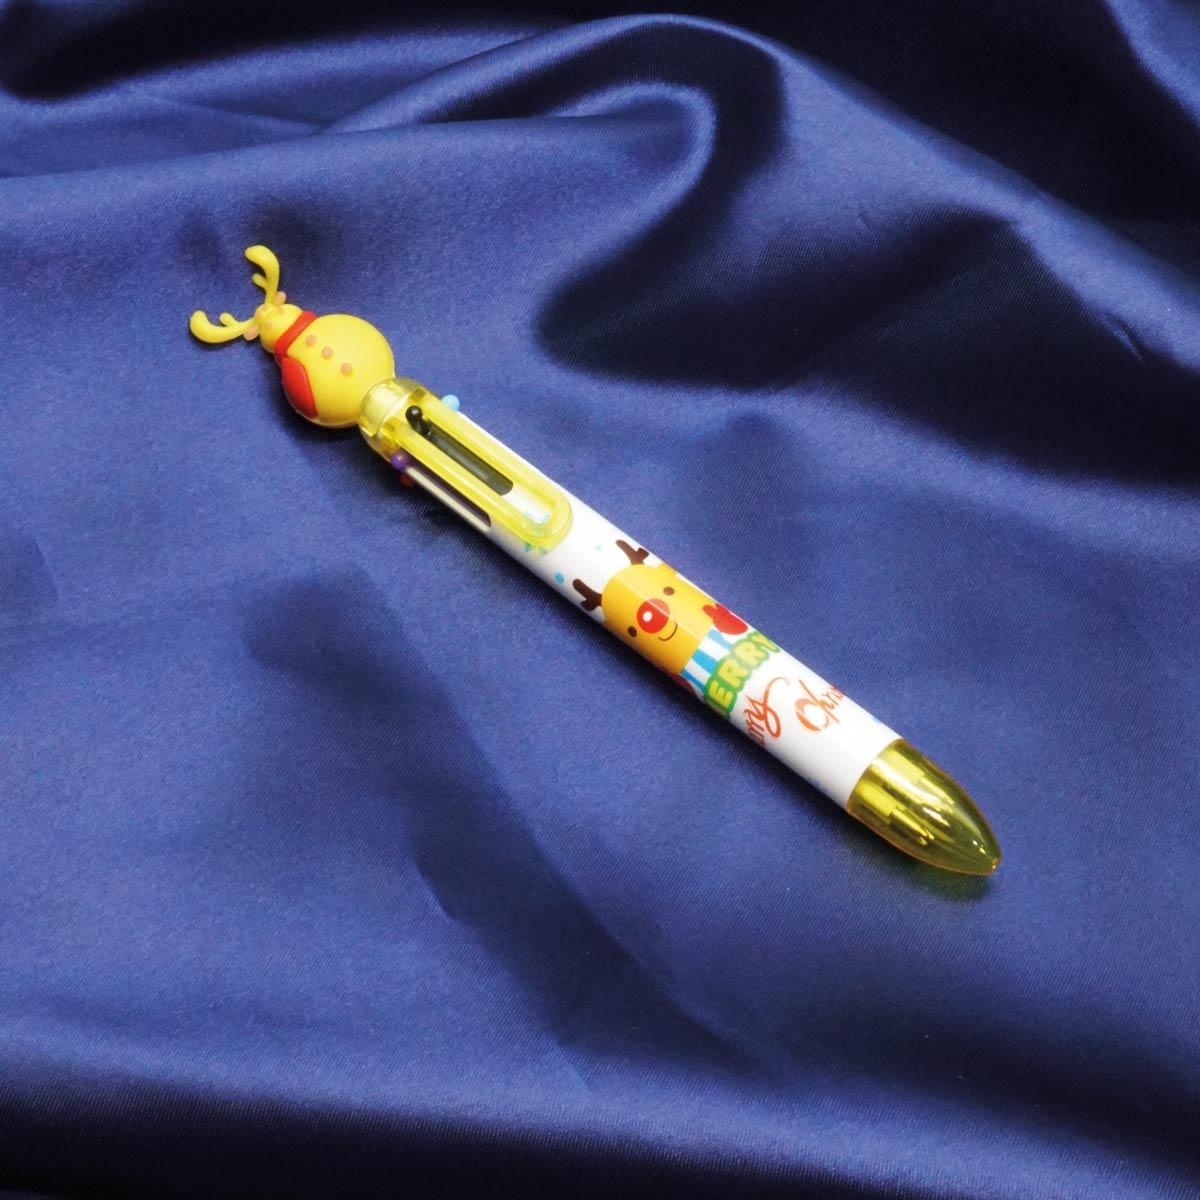 penhouse.in Deer Face Top Design With 6 Multicolor Writing Click Type Toy Ball Pen SKU 55007